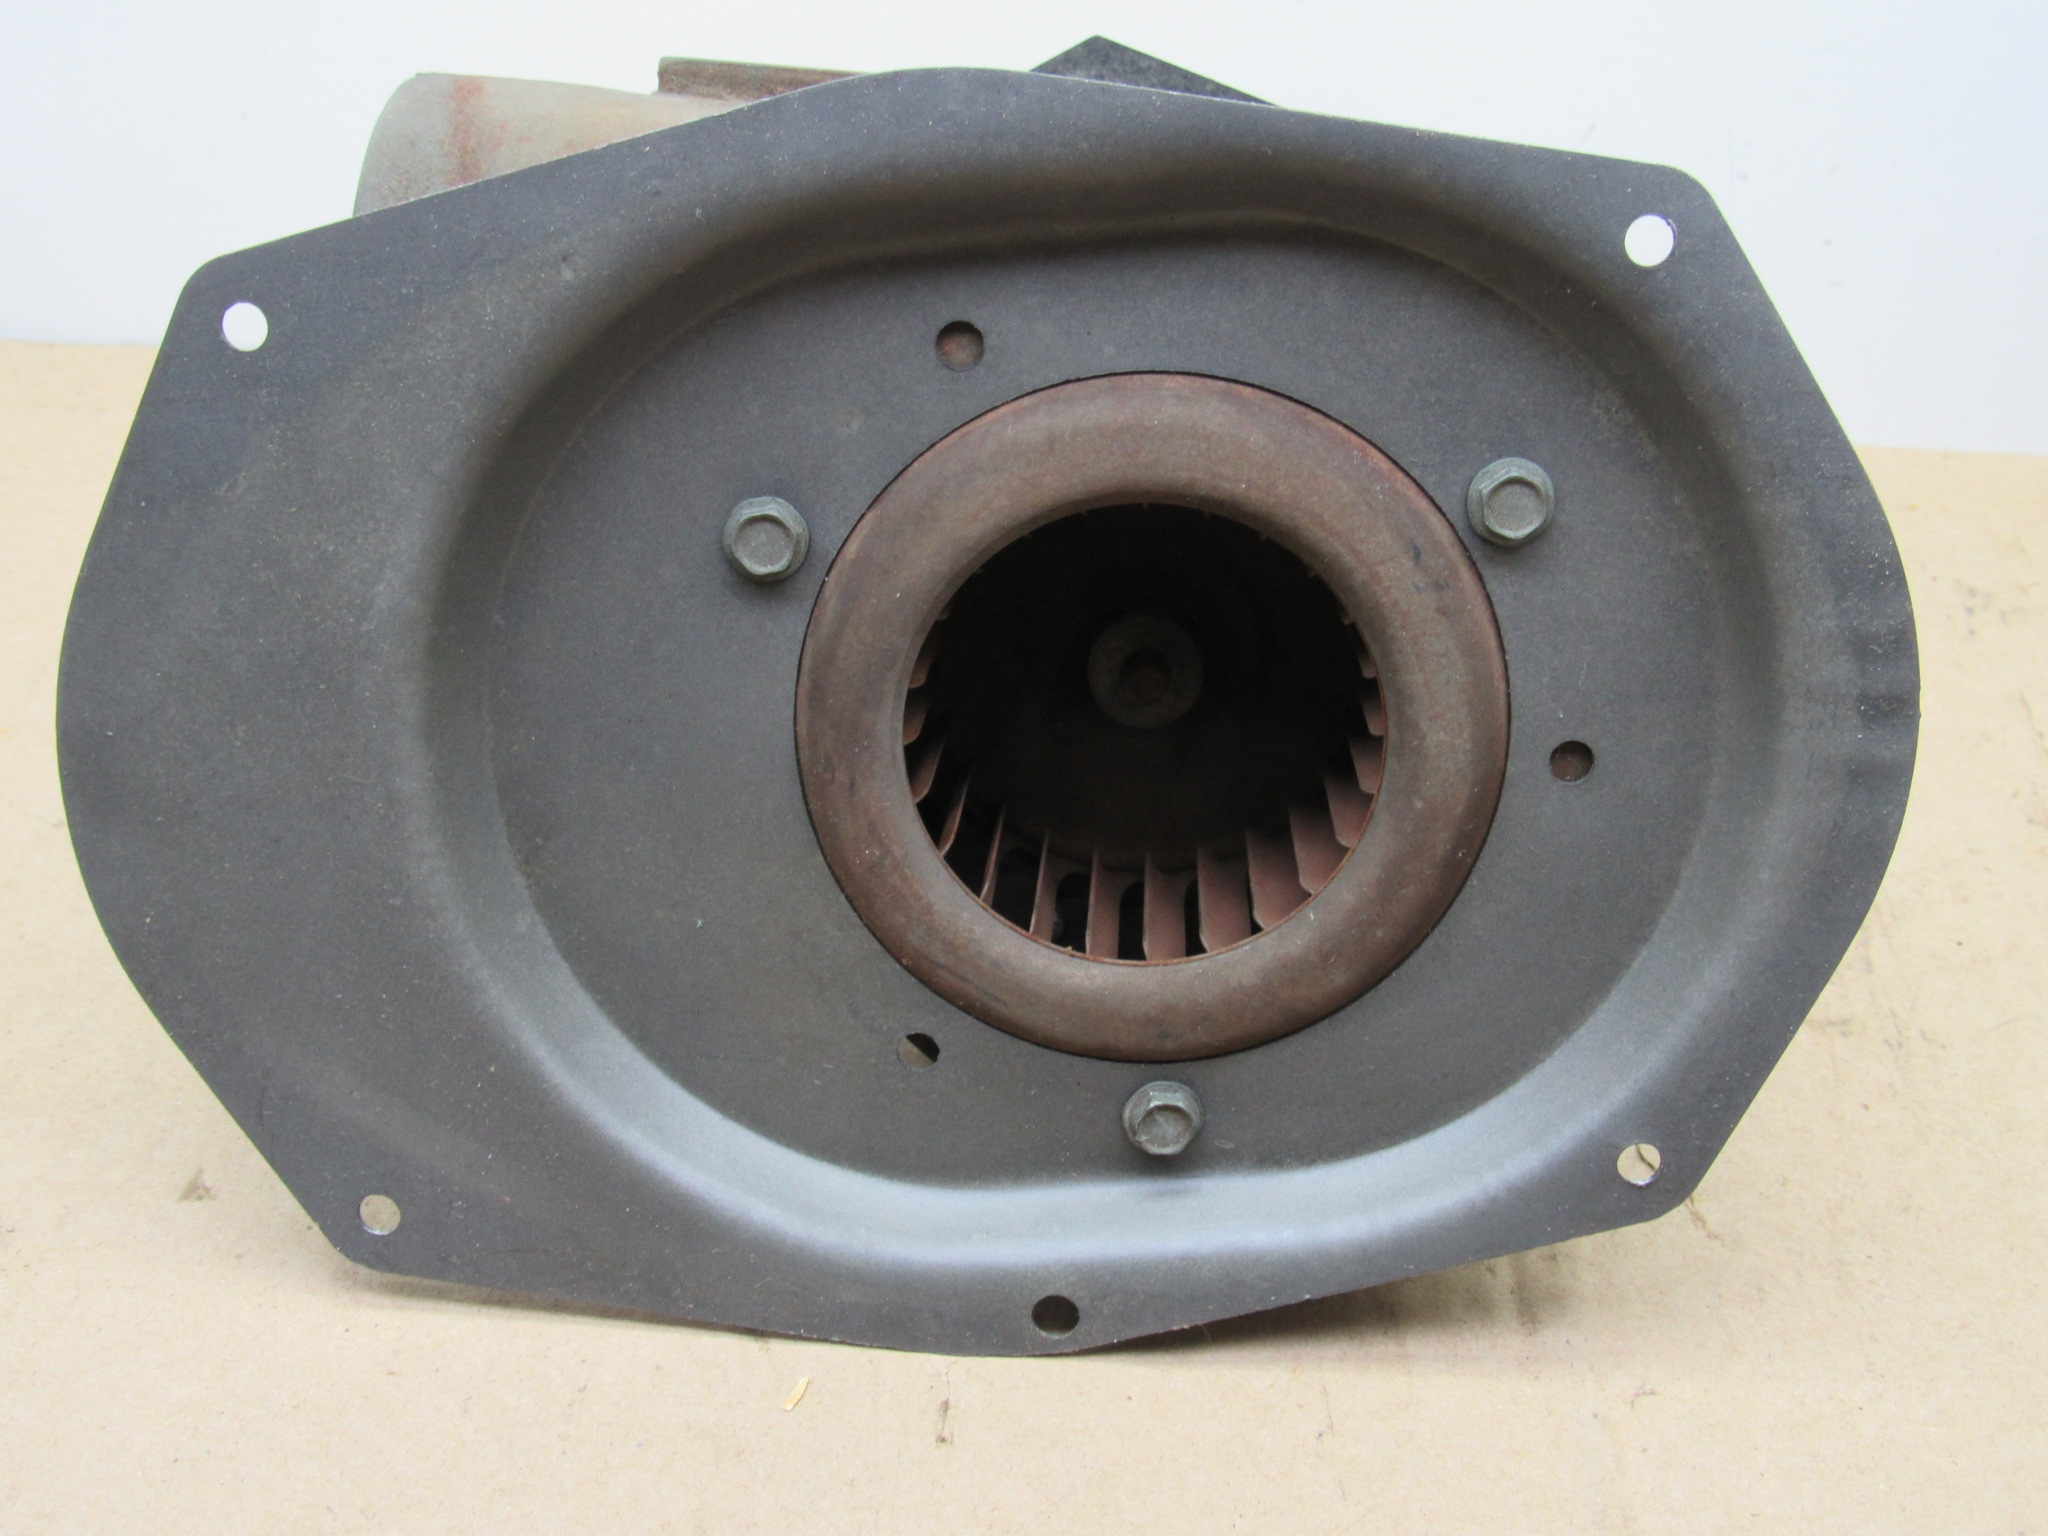 inlet view of motor assembly